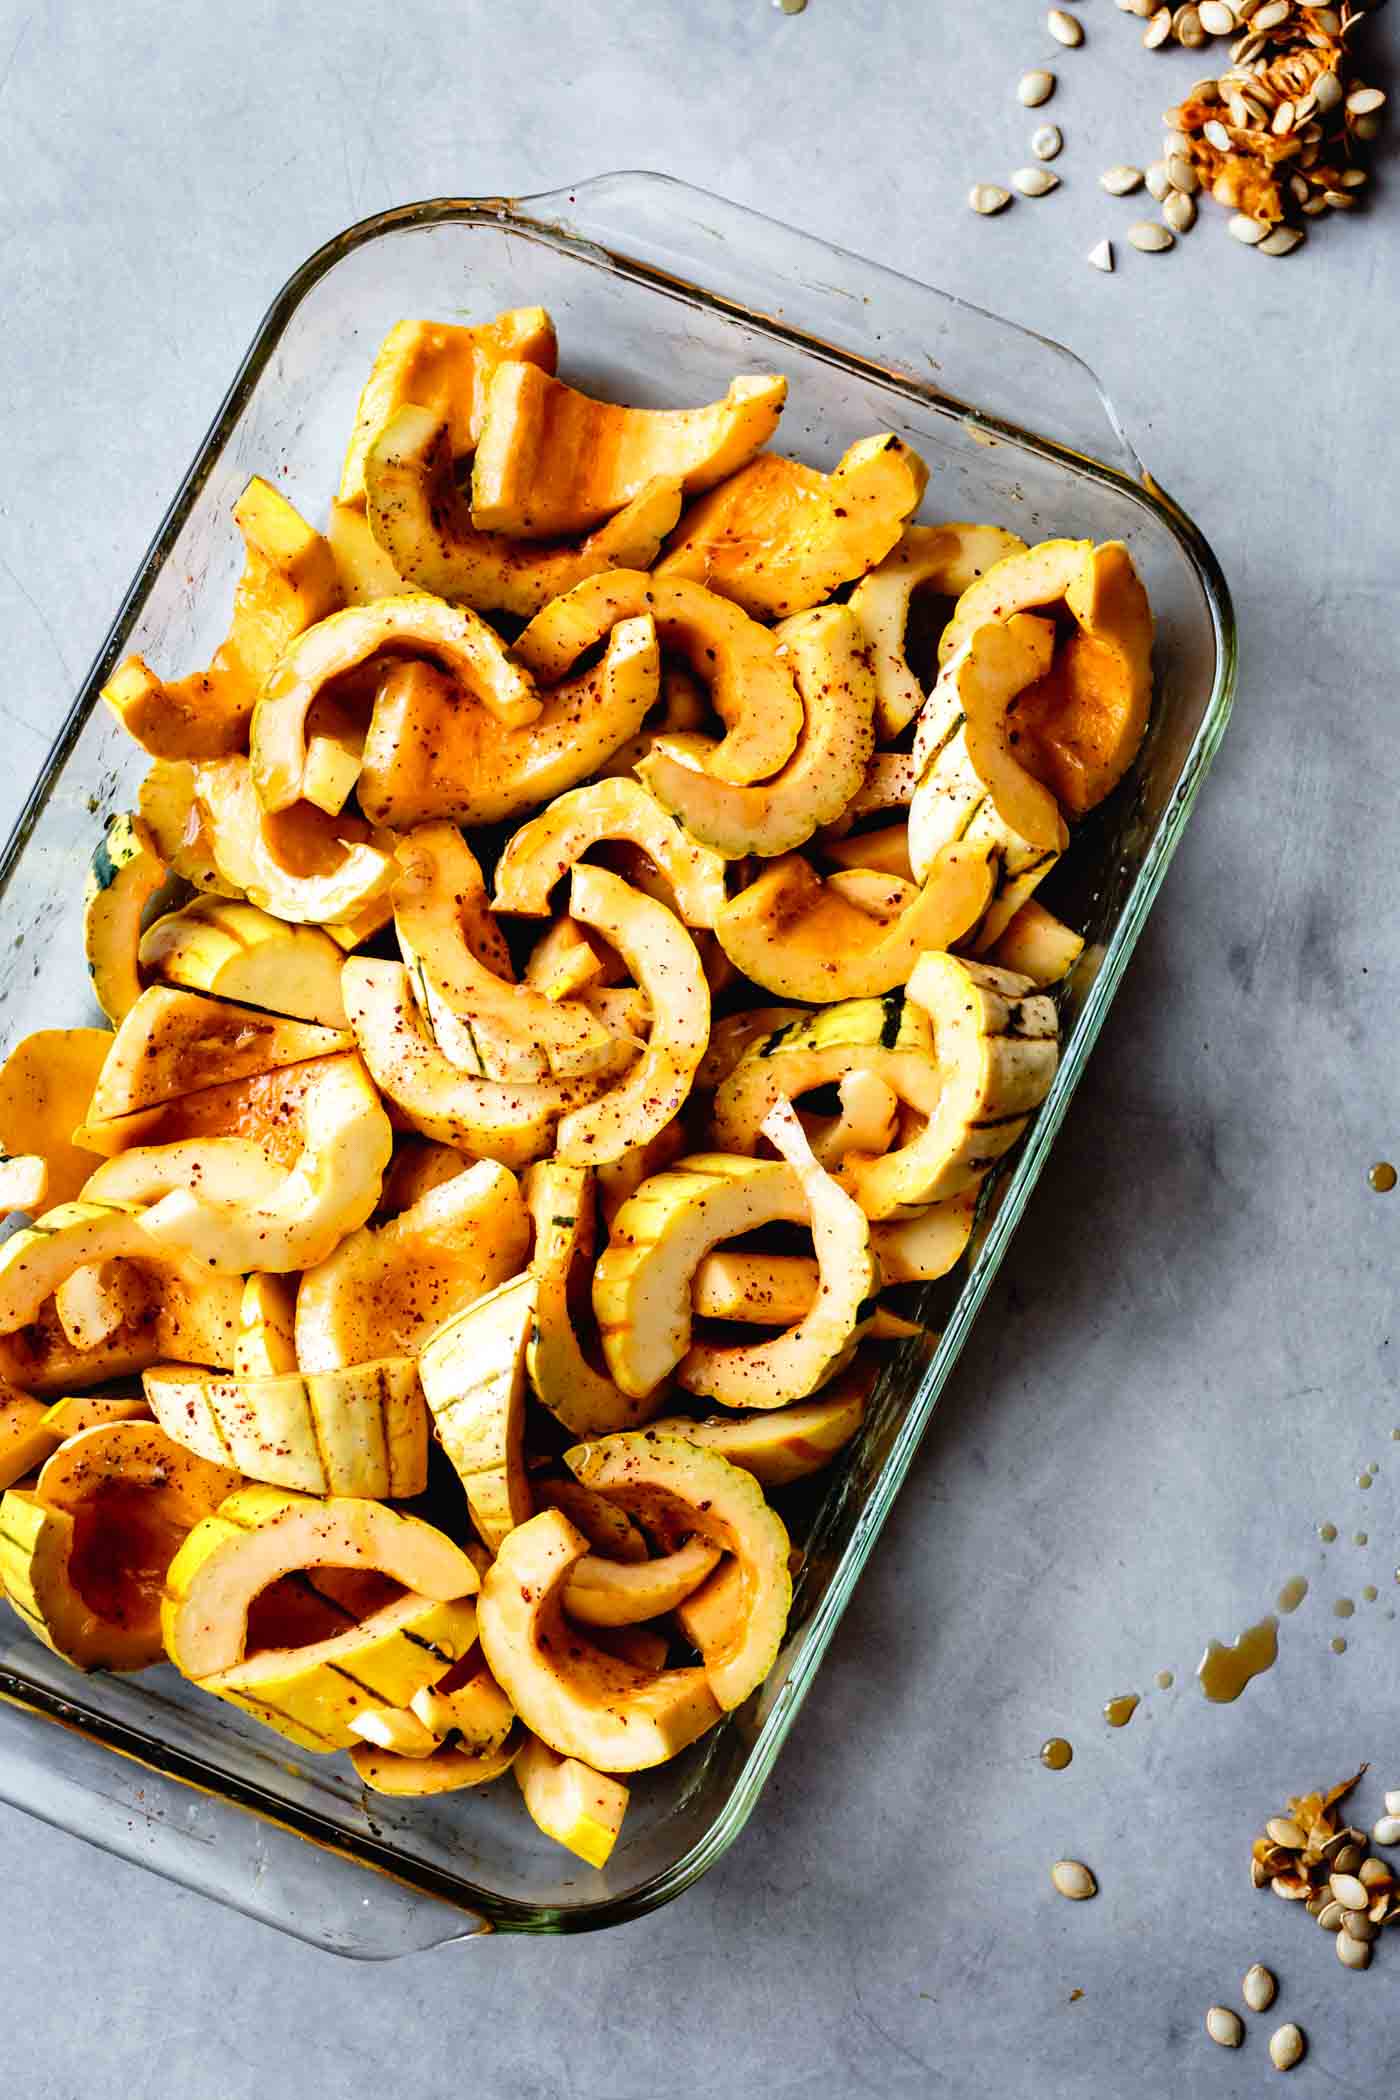 Showing how to roast delicata squash in a pan